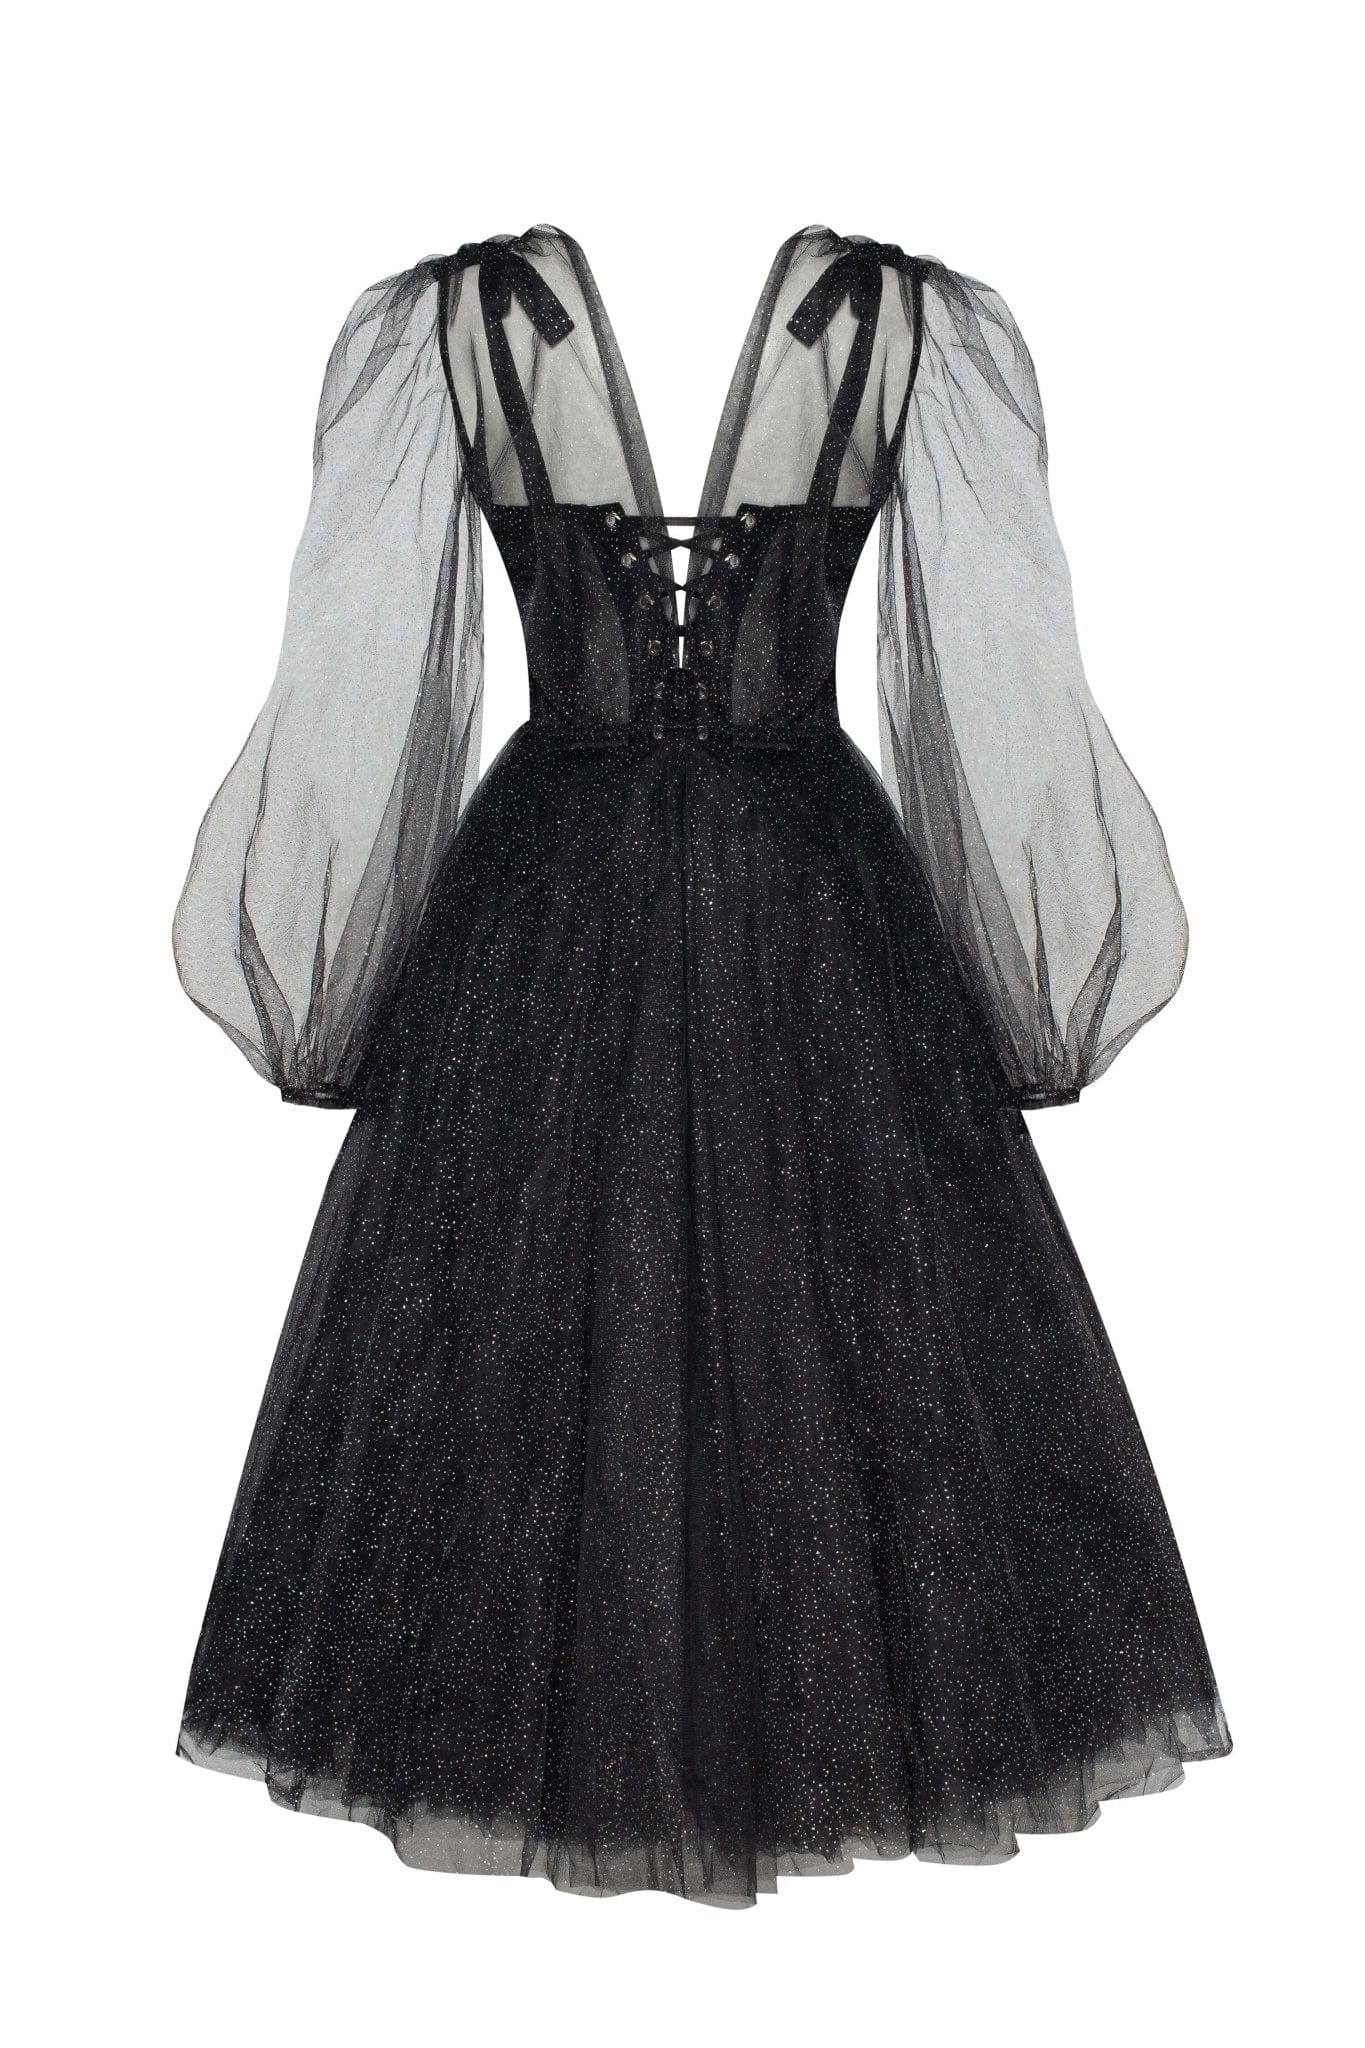 GOTHIC LONG LOLITA DRESS WITH LACE - MERMAID BLACK MODEST